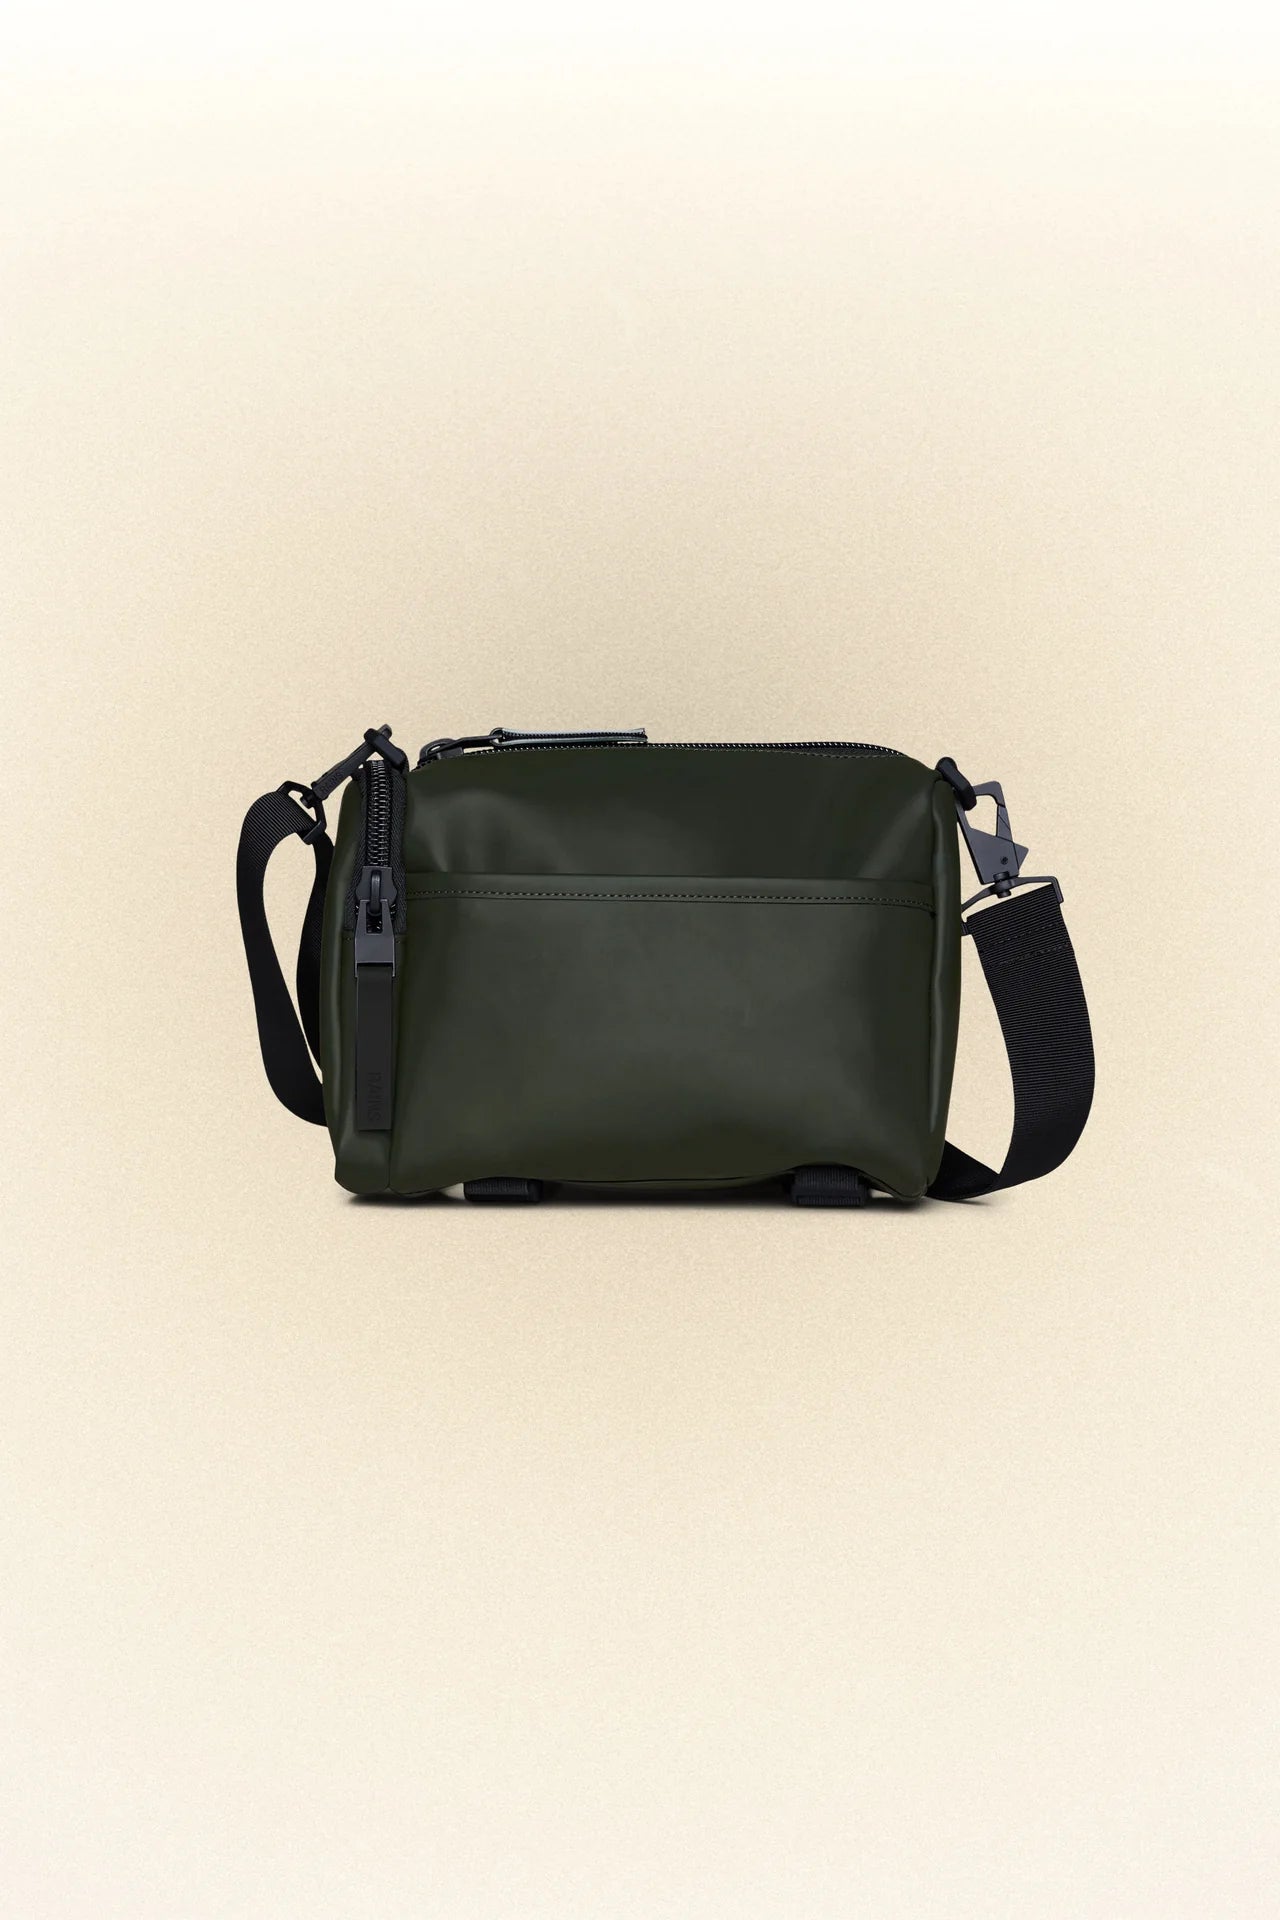 A Rains Texel Crossbody Bag - Green for daily essentials on a white background.